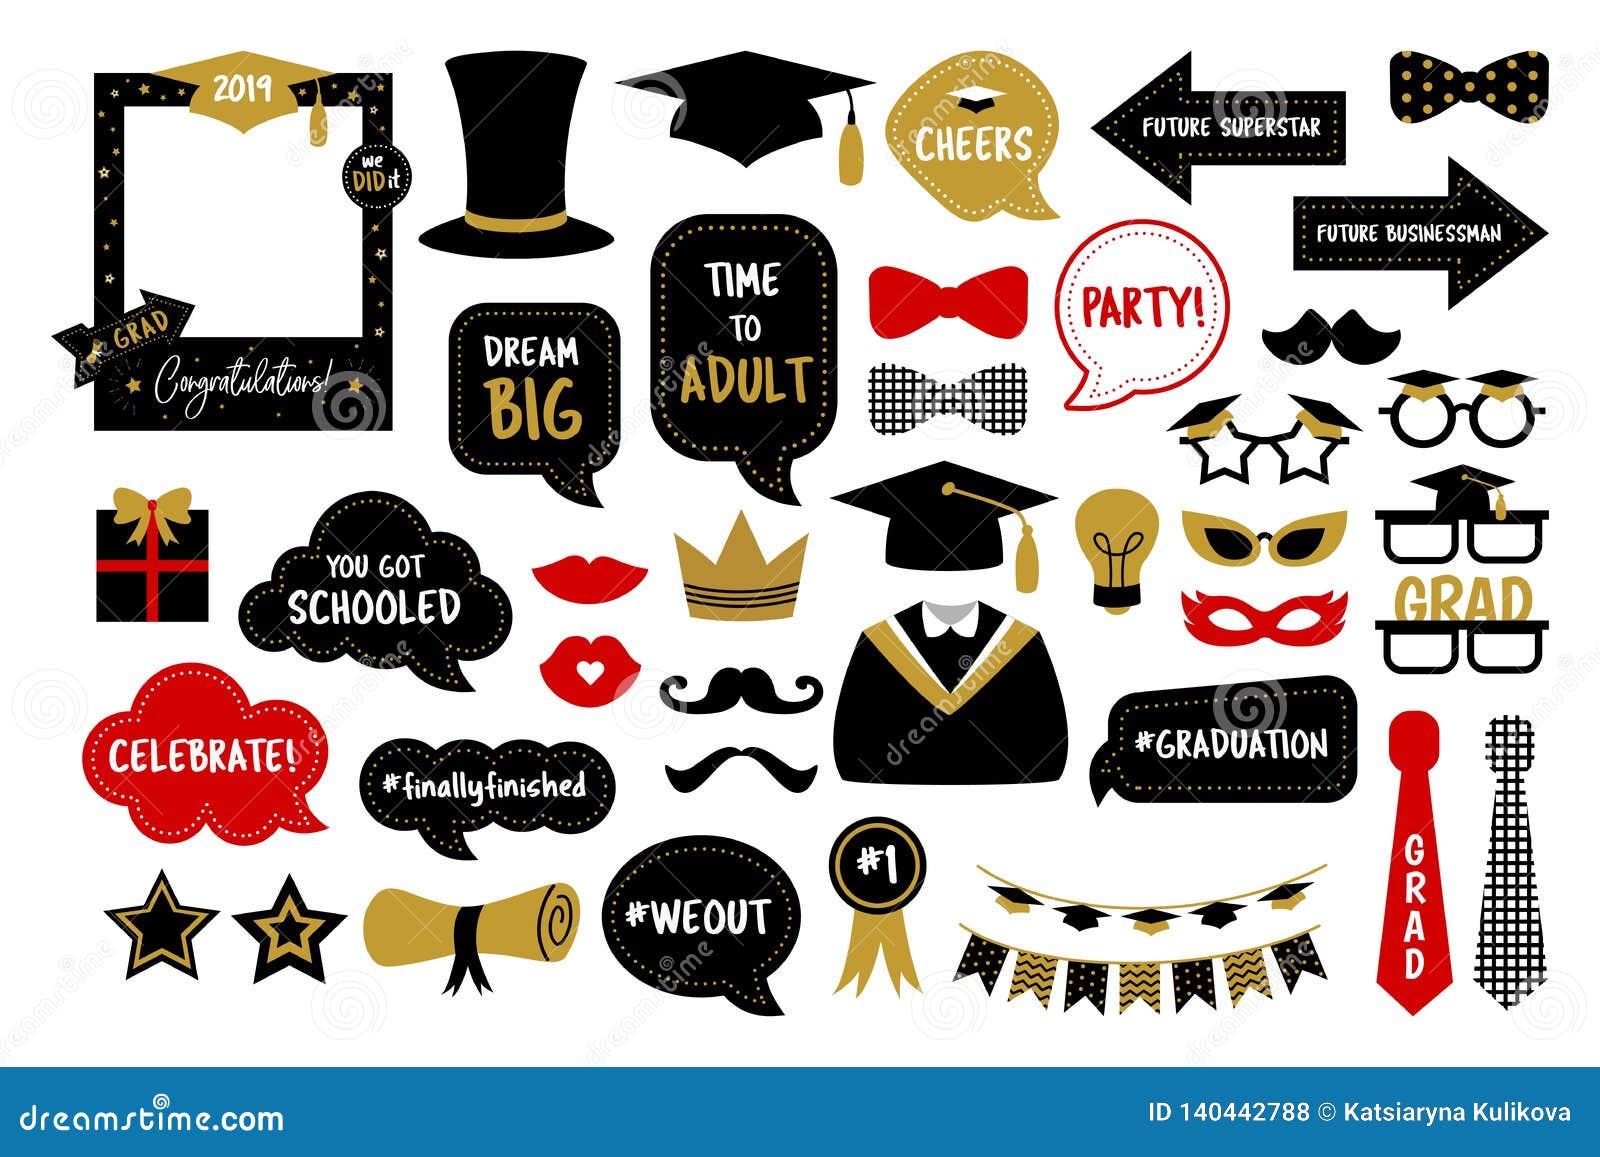 Photo Booth Props For Graduation Party Photobooth Stock Vector Illustration Of Grad Celebration 140442788